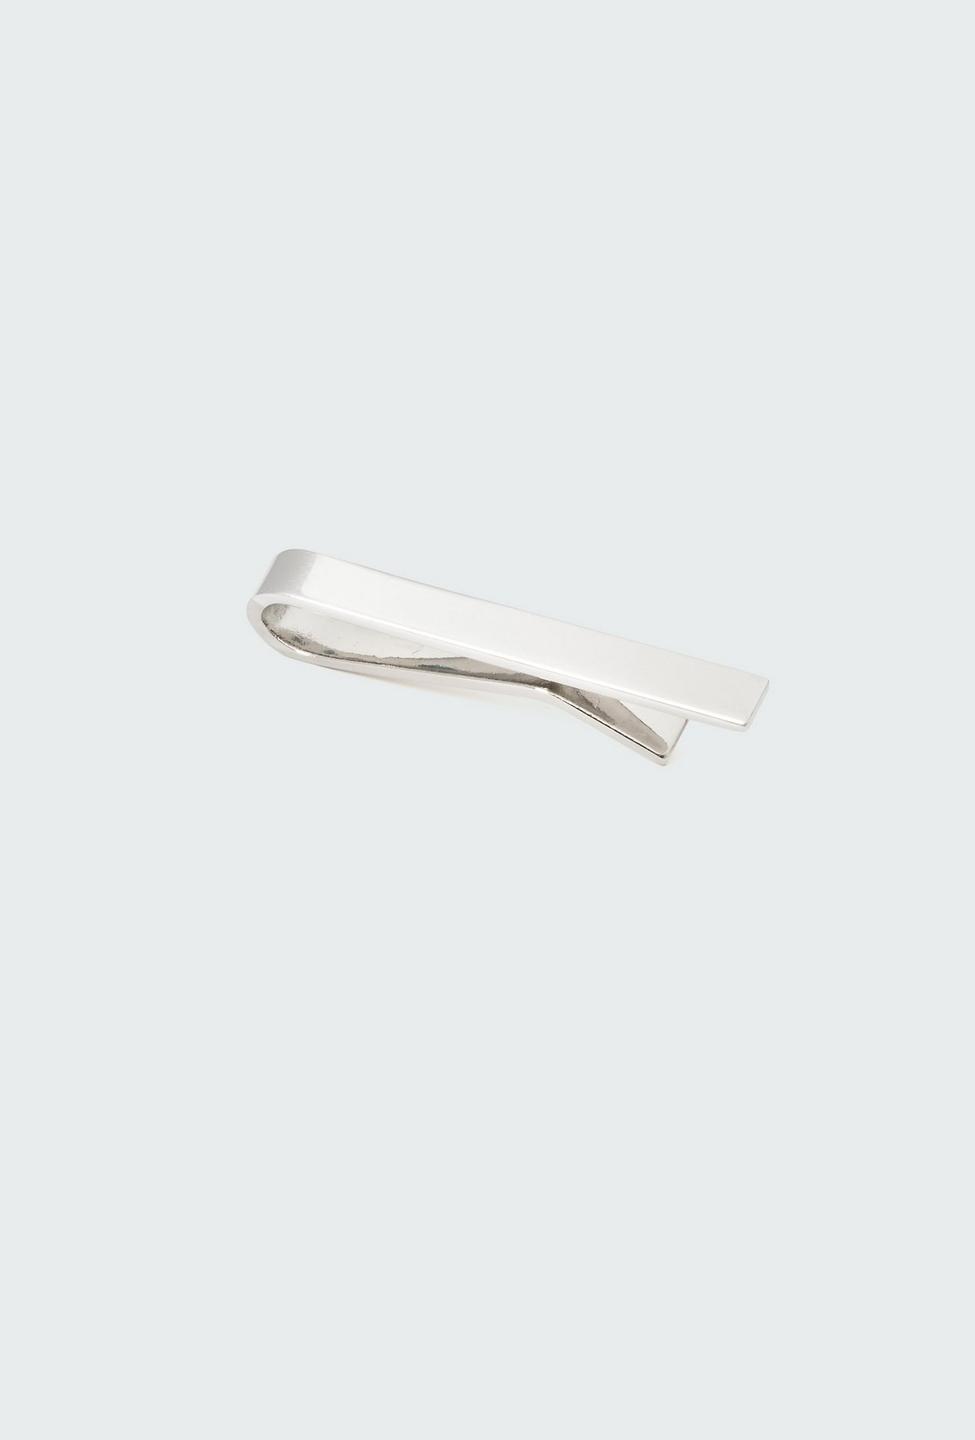 Silver tie clip - from Indochino Collection